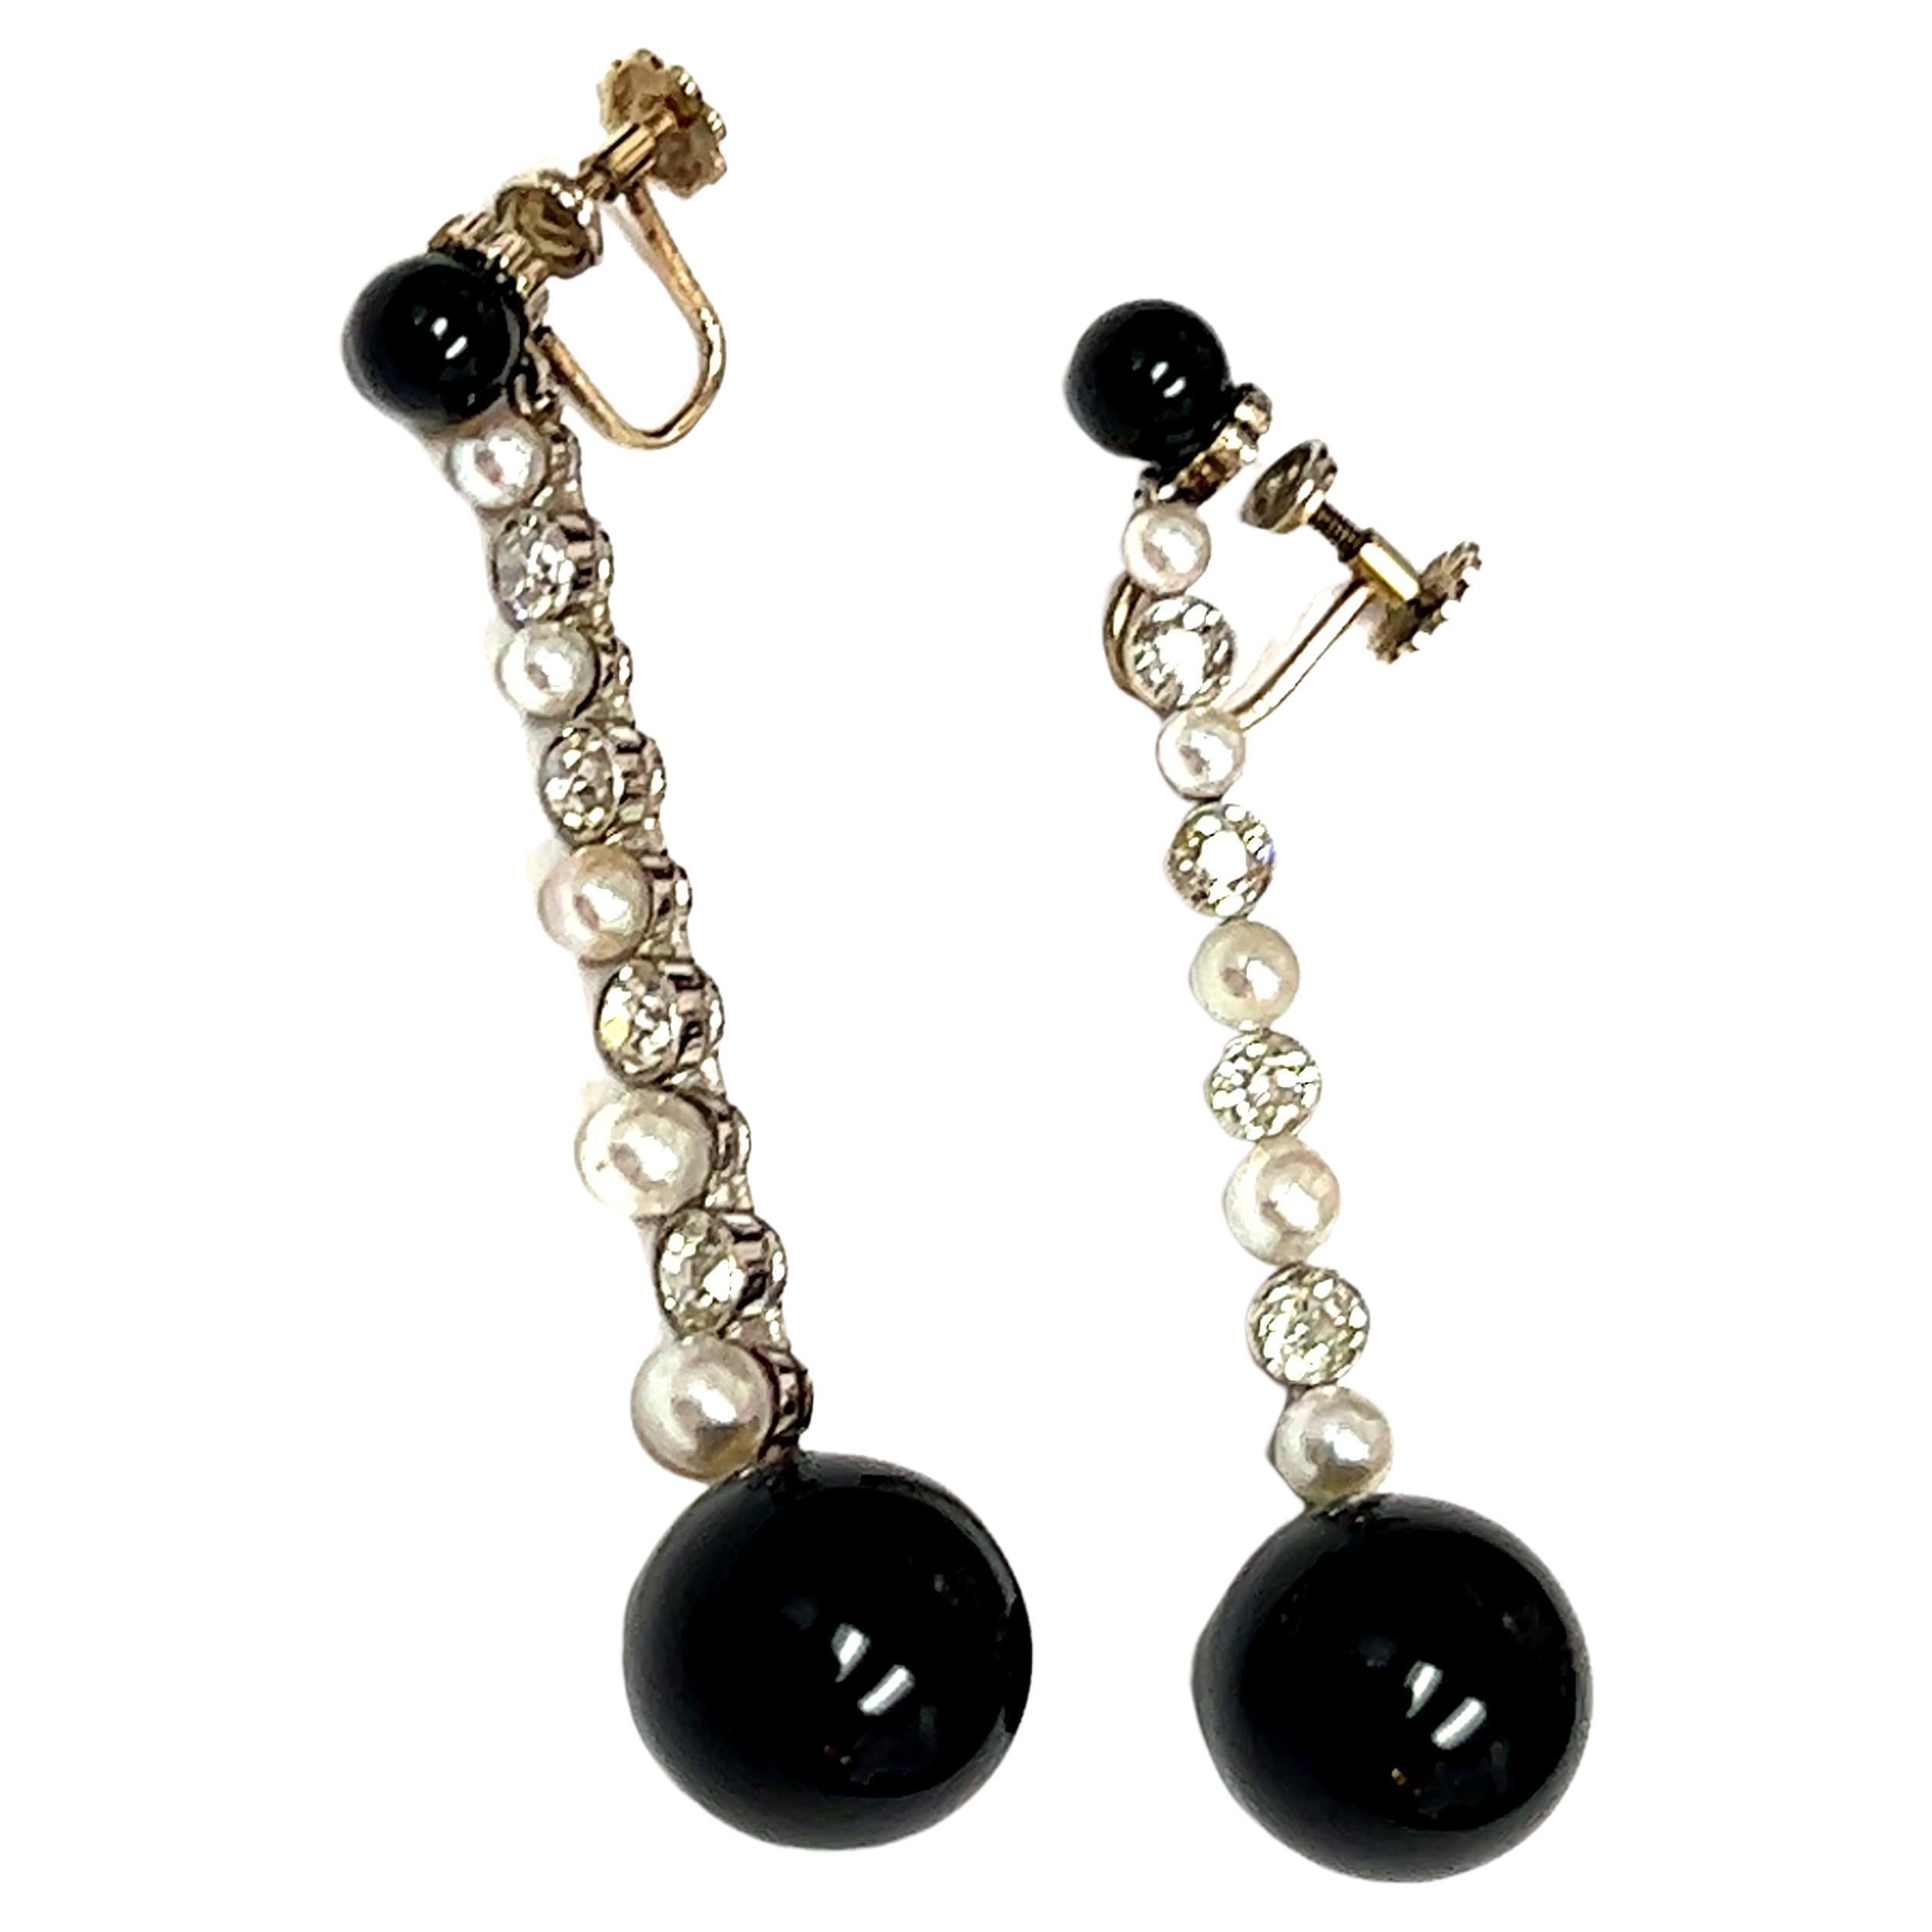 A stunning pair of Platinum Art Deco Onyx, Pearl, and Diamond Earrings, a true embodiment of the timeless elegance and geometric precision characteristic of the Art Deco era. The earrings feature round onyx beads that gracefully dangle, creating a